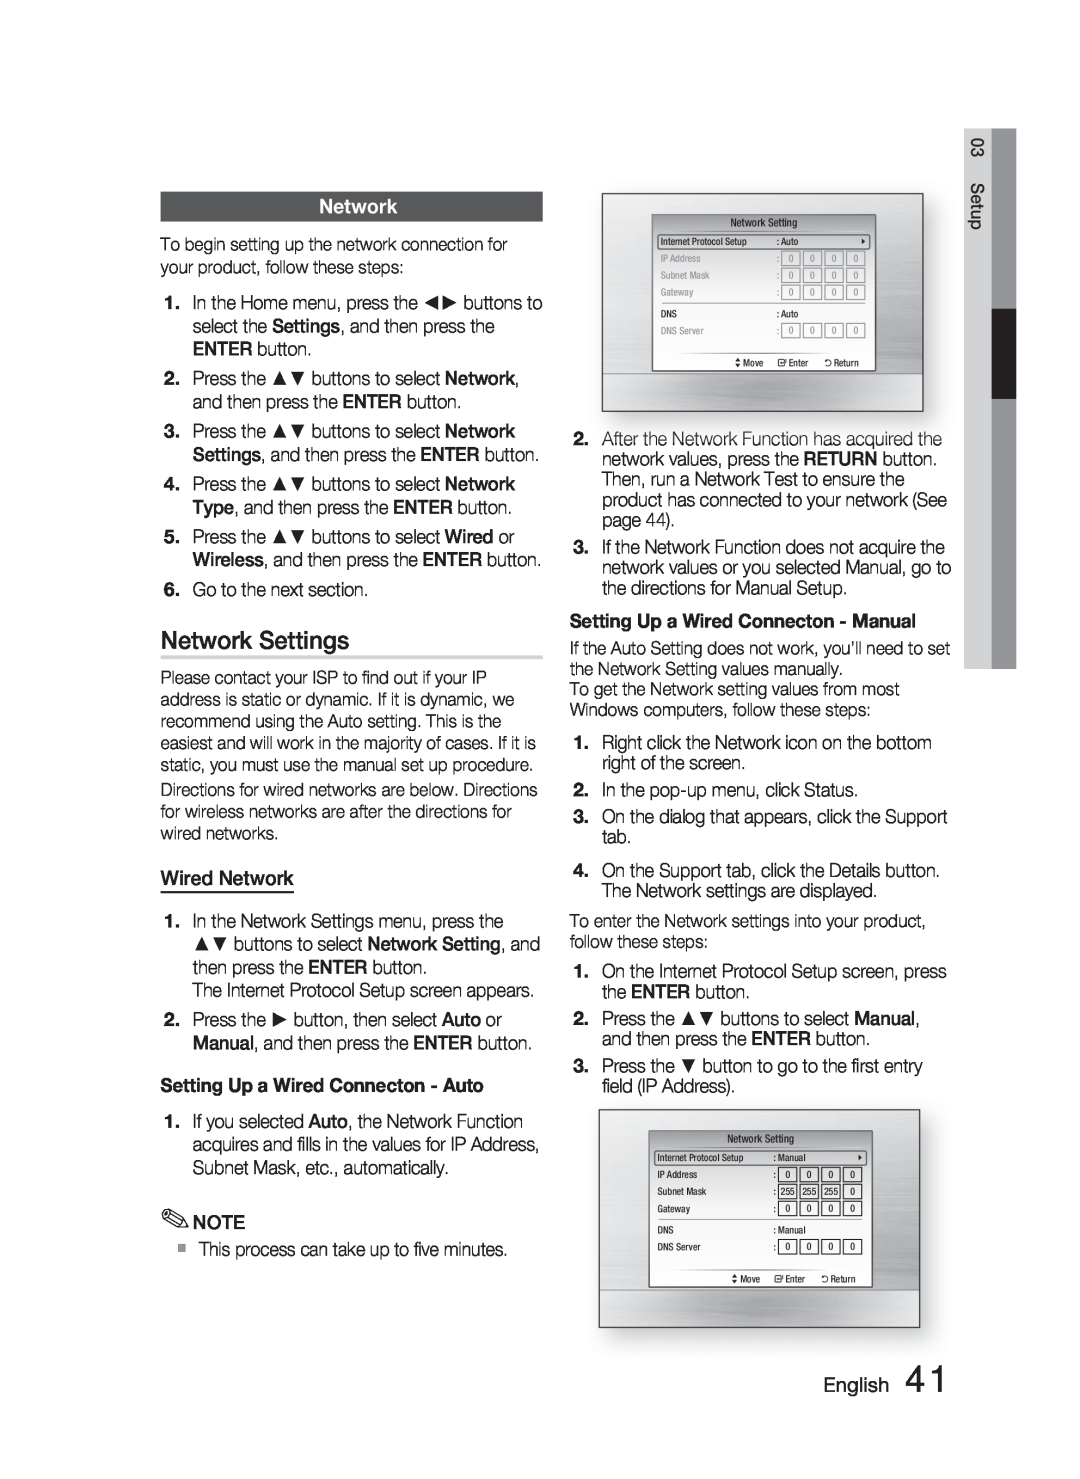 Samsung AH68-02279R user manual Network Settings, Wired Network, English 